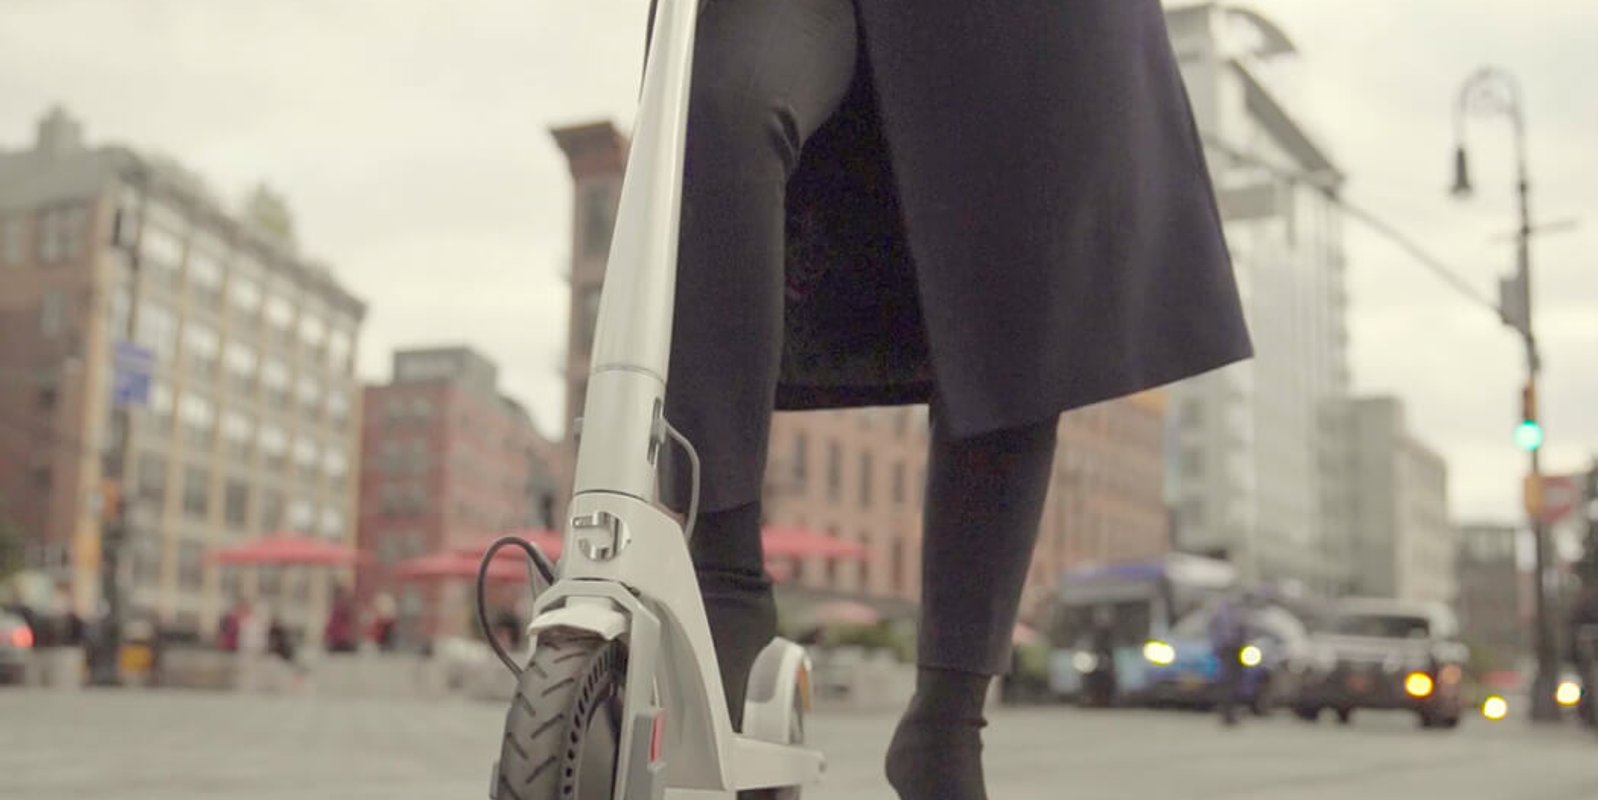 Commuting By Electric Scooter? What You Need To Know